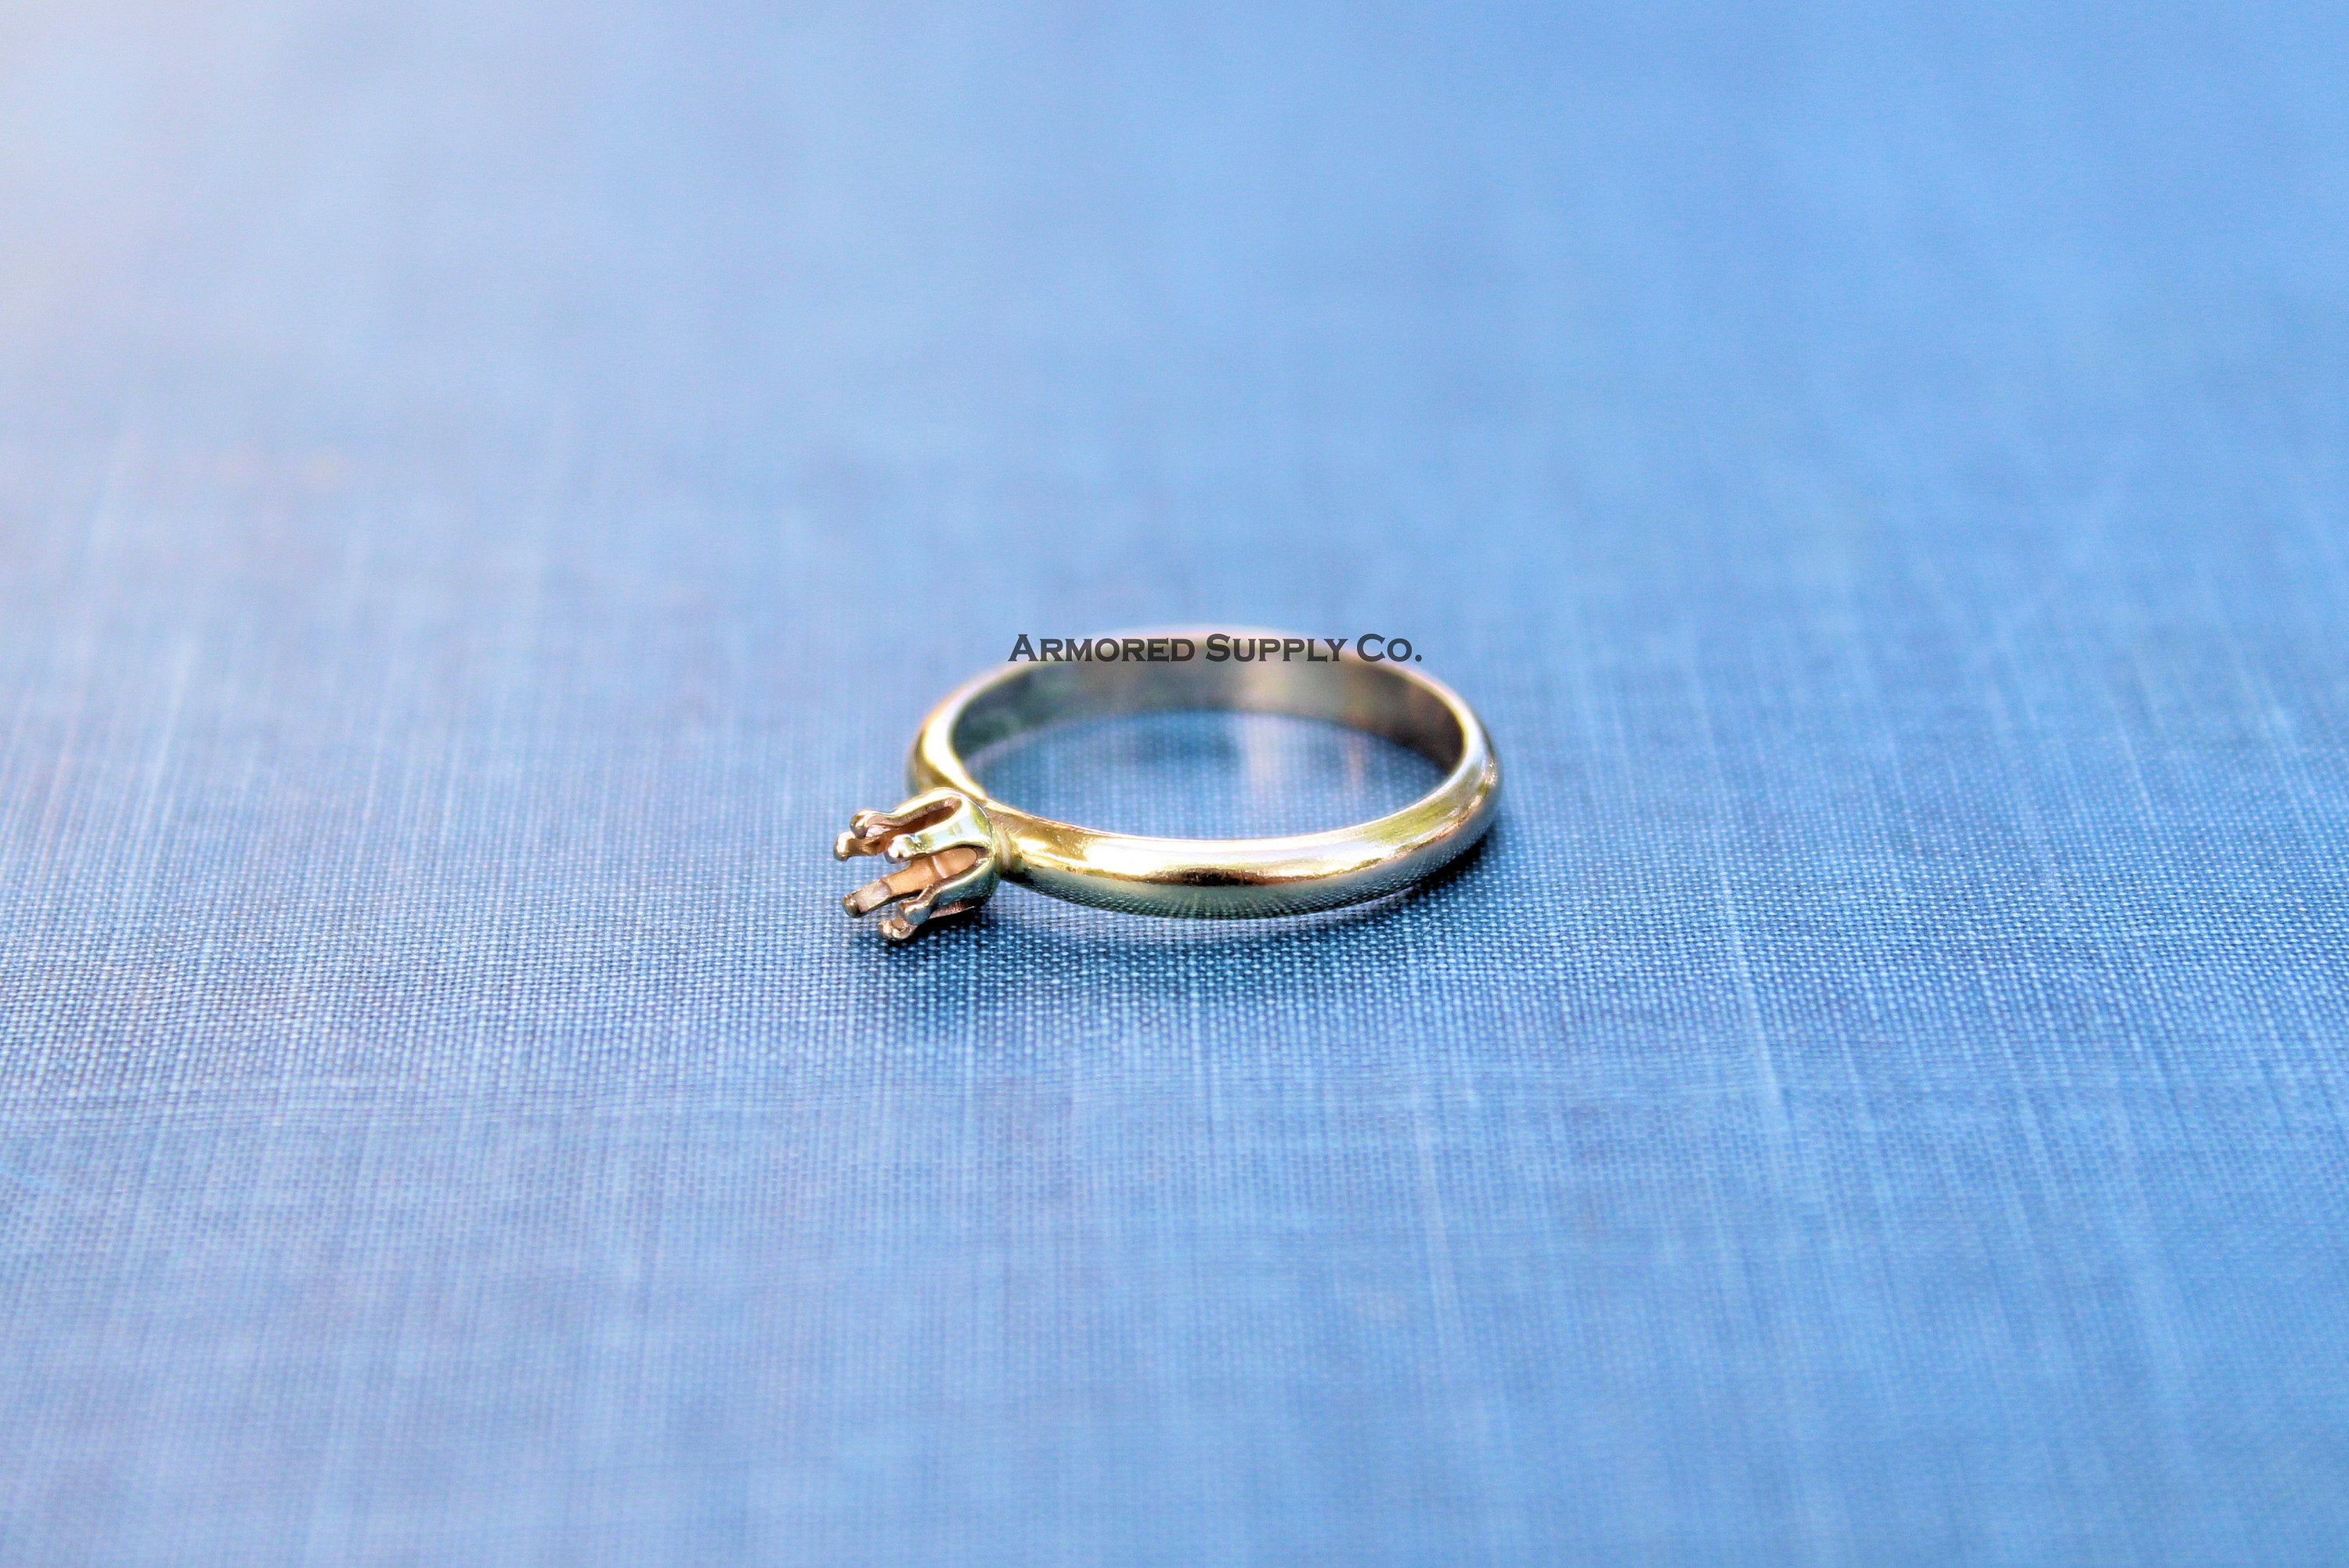 Gold Filled 3mm Snap In Bezel Ring blank,Half Round Ring Band, Breast Milk DIY ring, DIY jewelry supplies, wholesale jewelry, diy ring blank